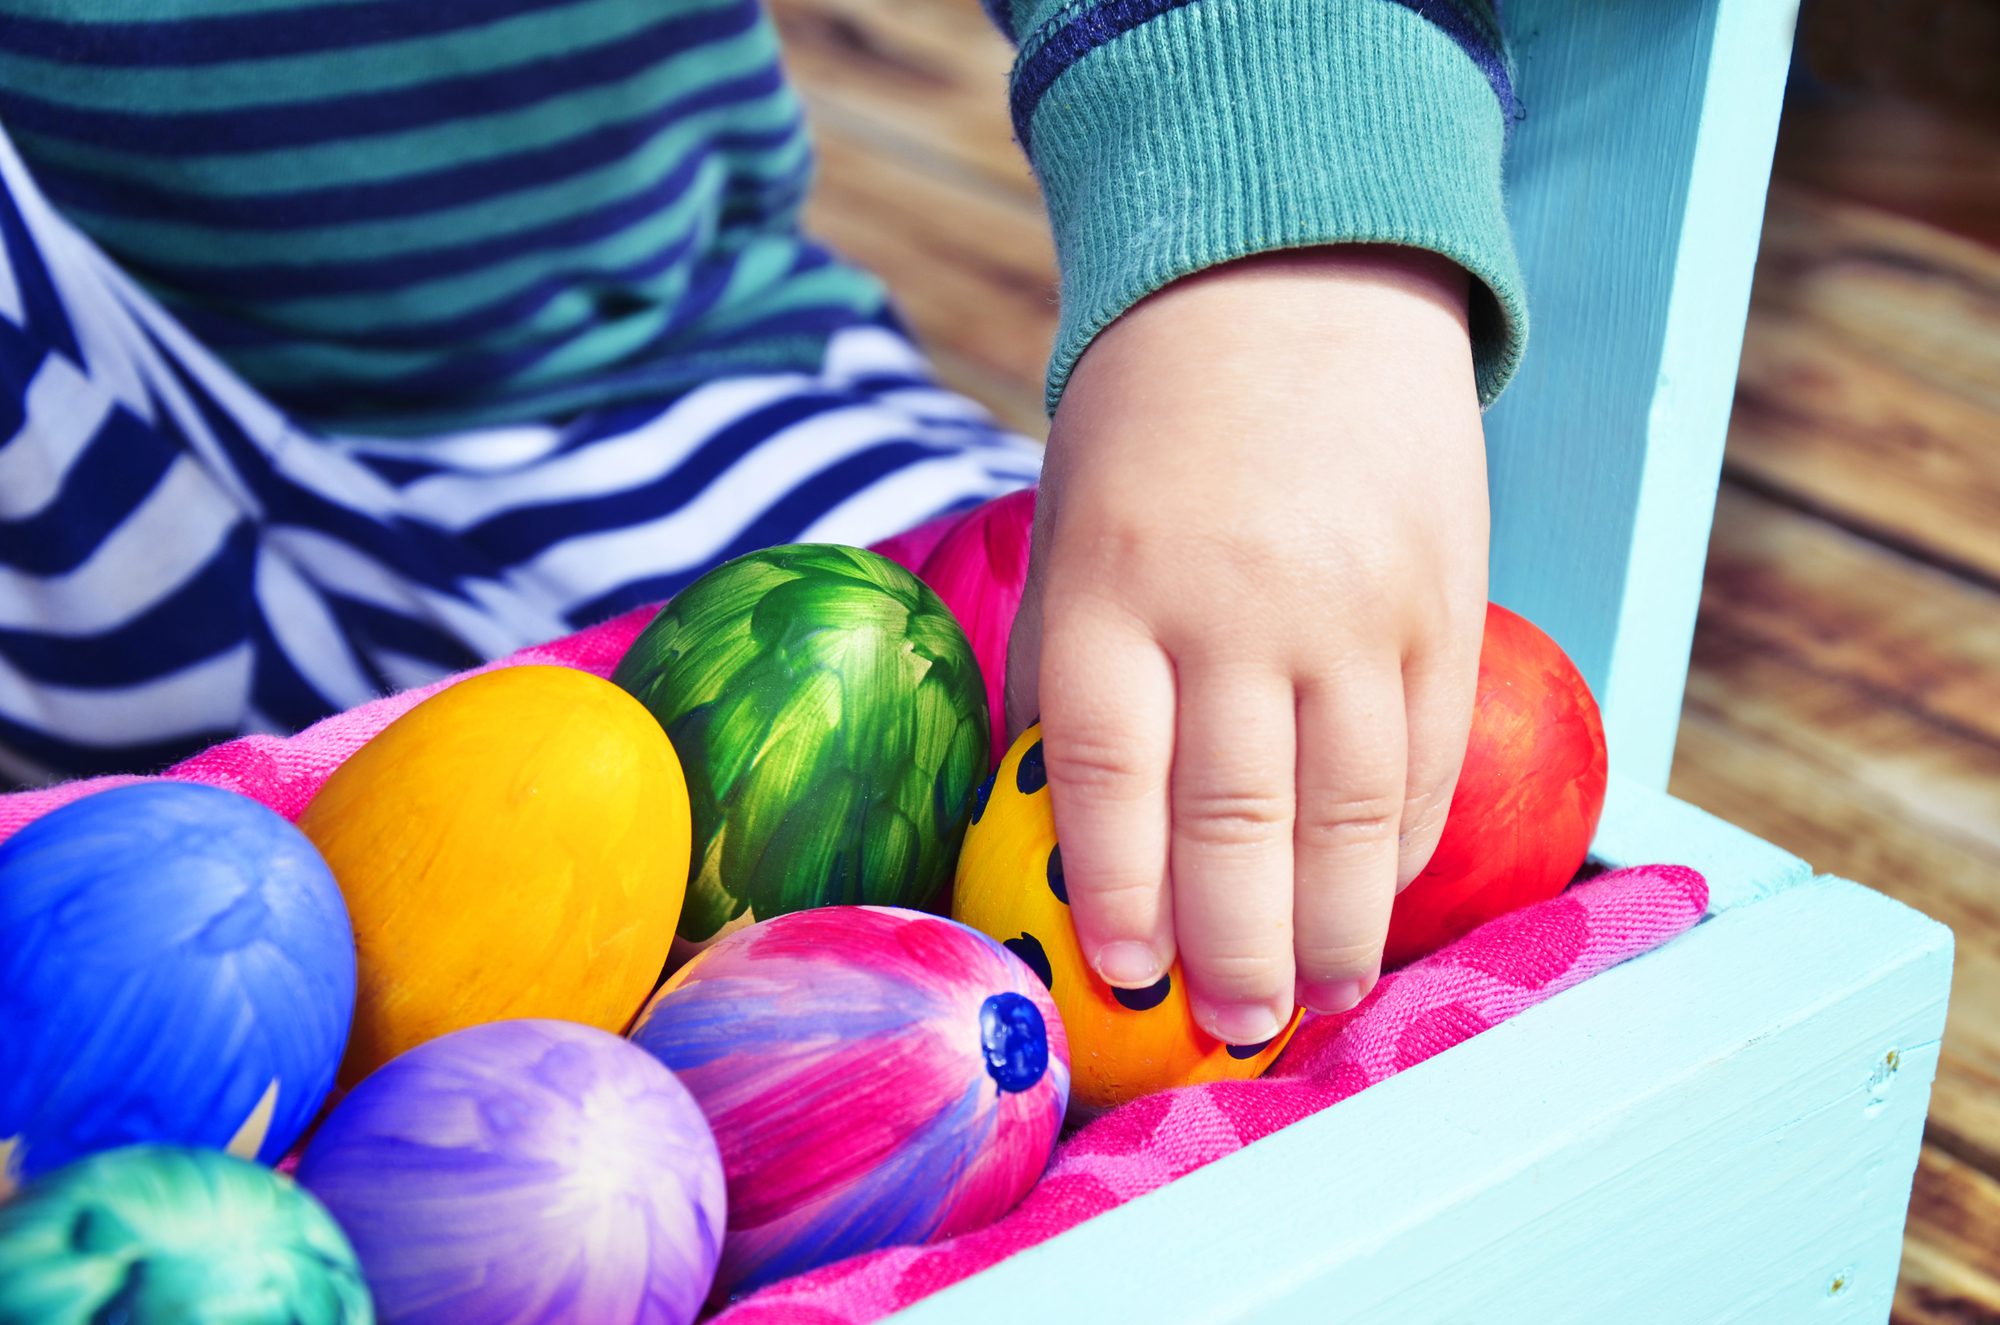 A child selecting painted eggs